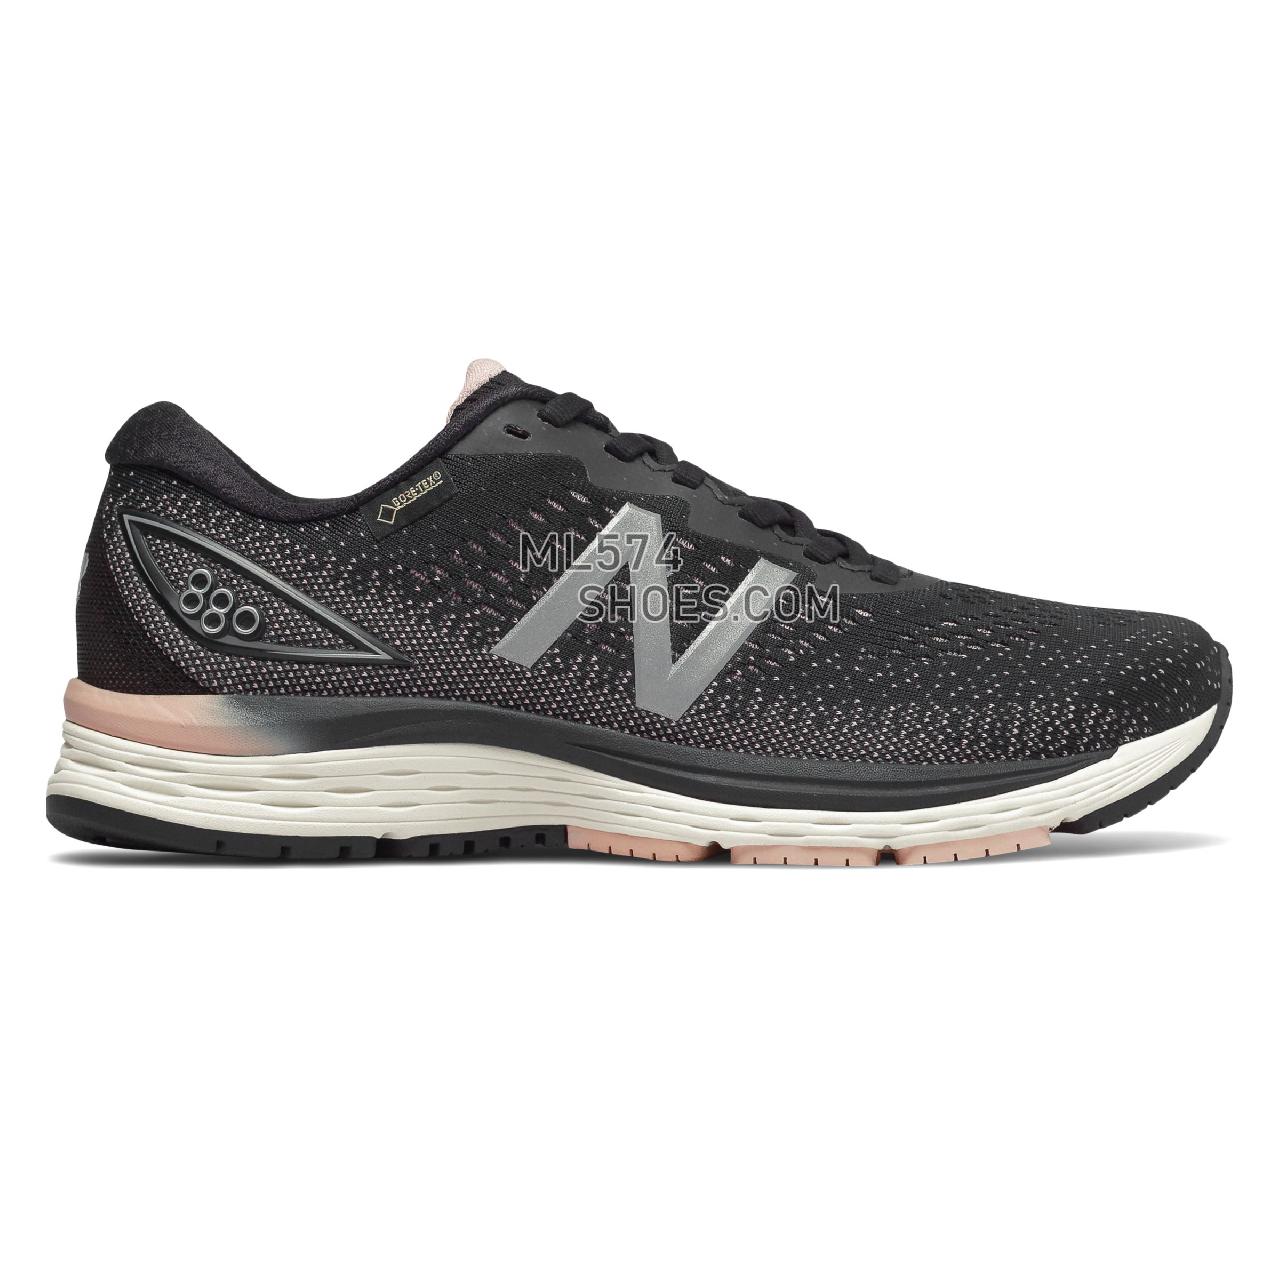 New Balance 880v9 GTX - Women's Neutral Running - Black with Magnet and White Oak - W880GT9